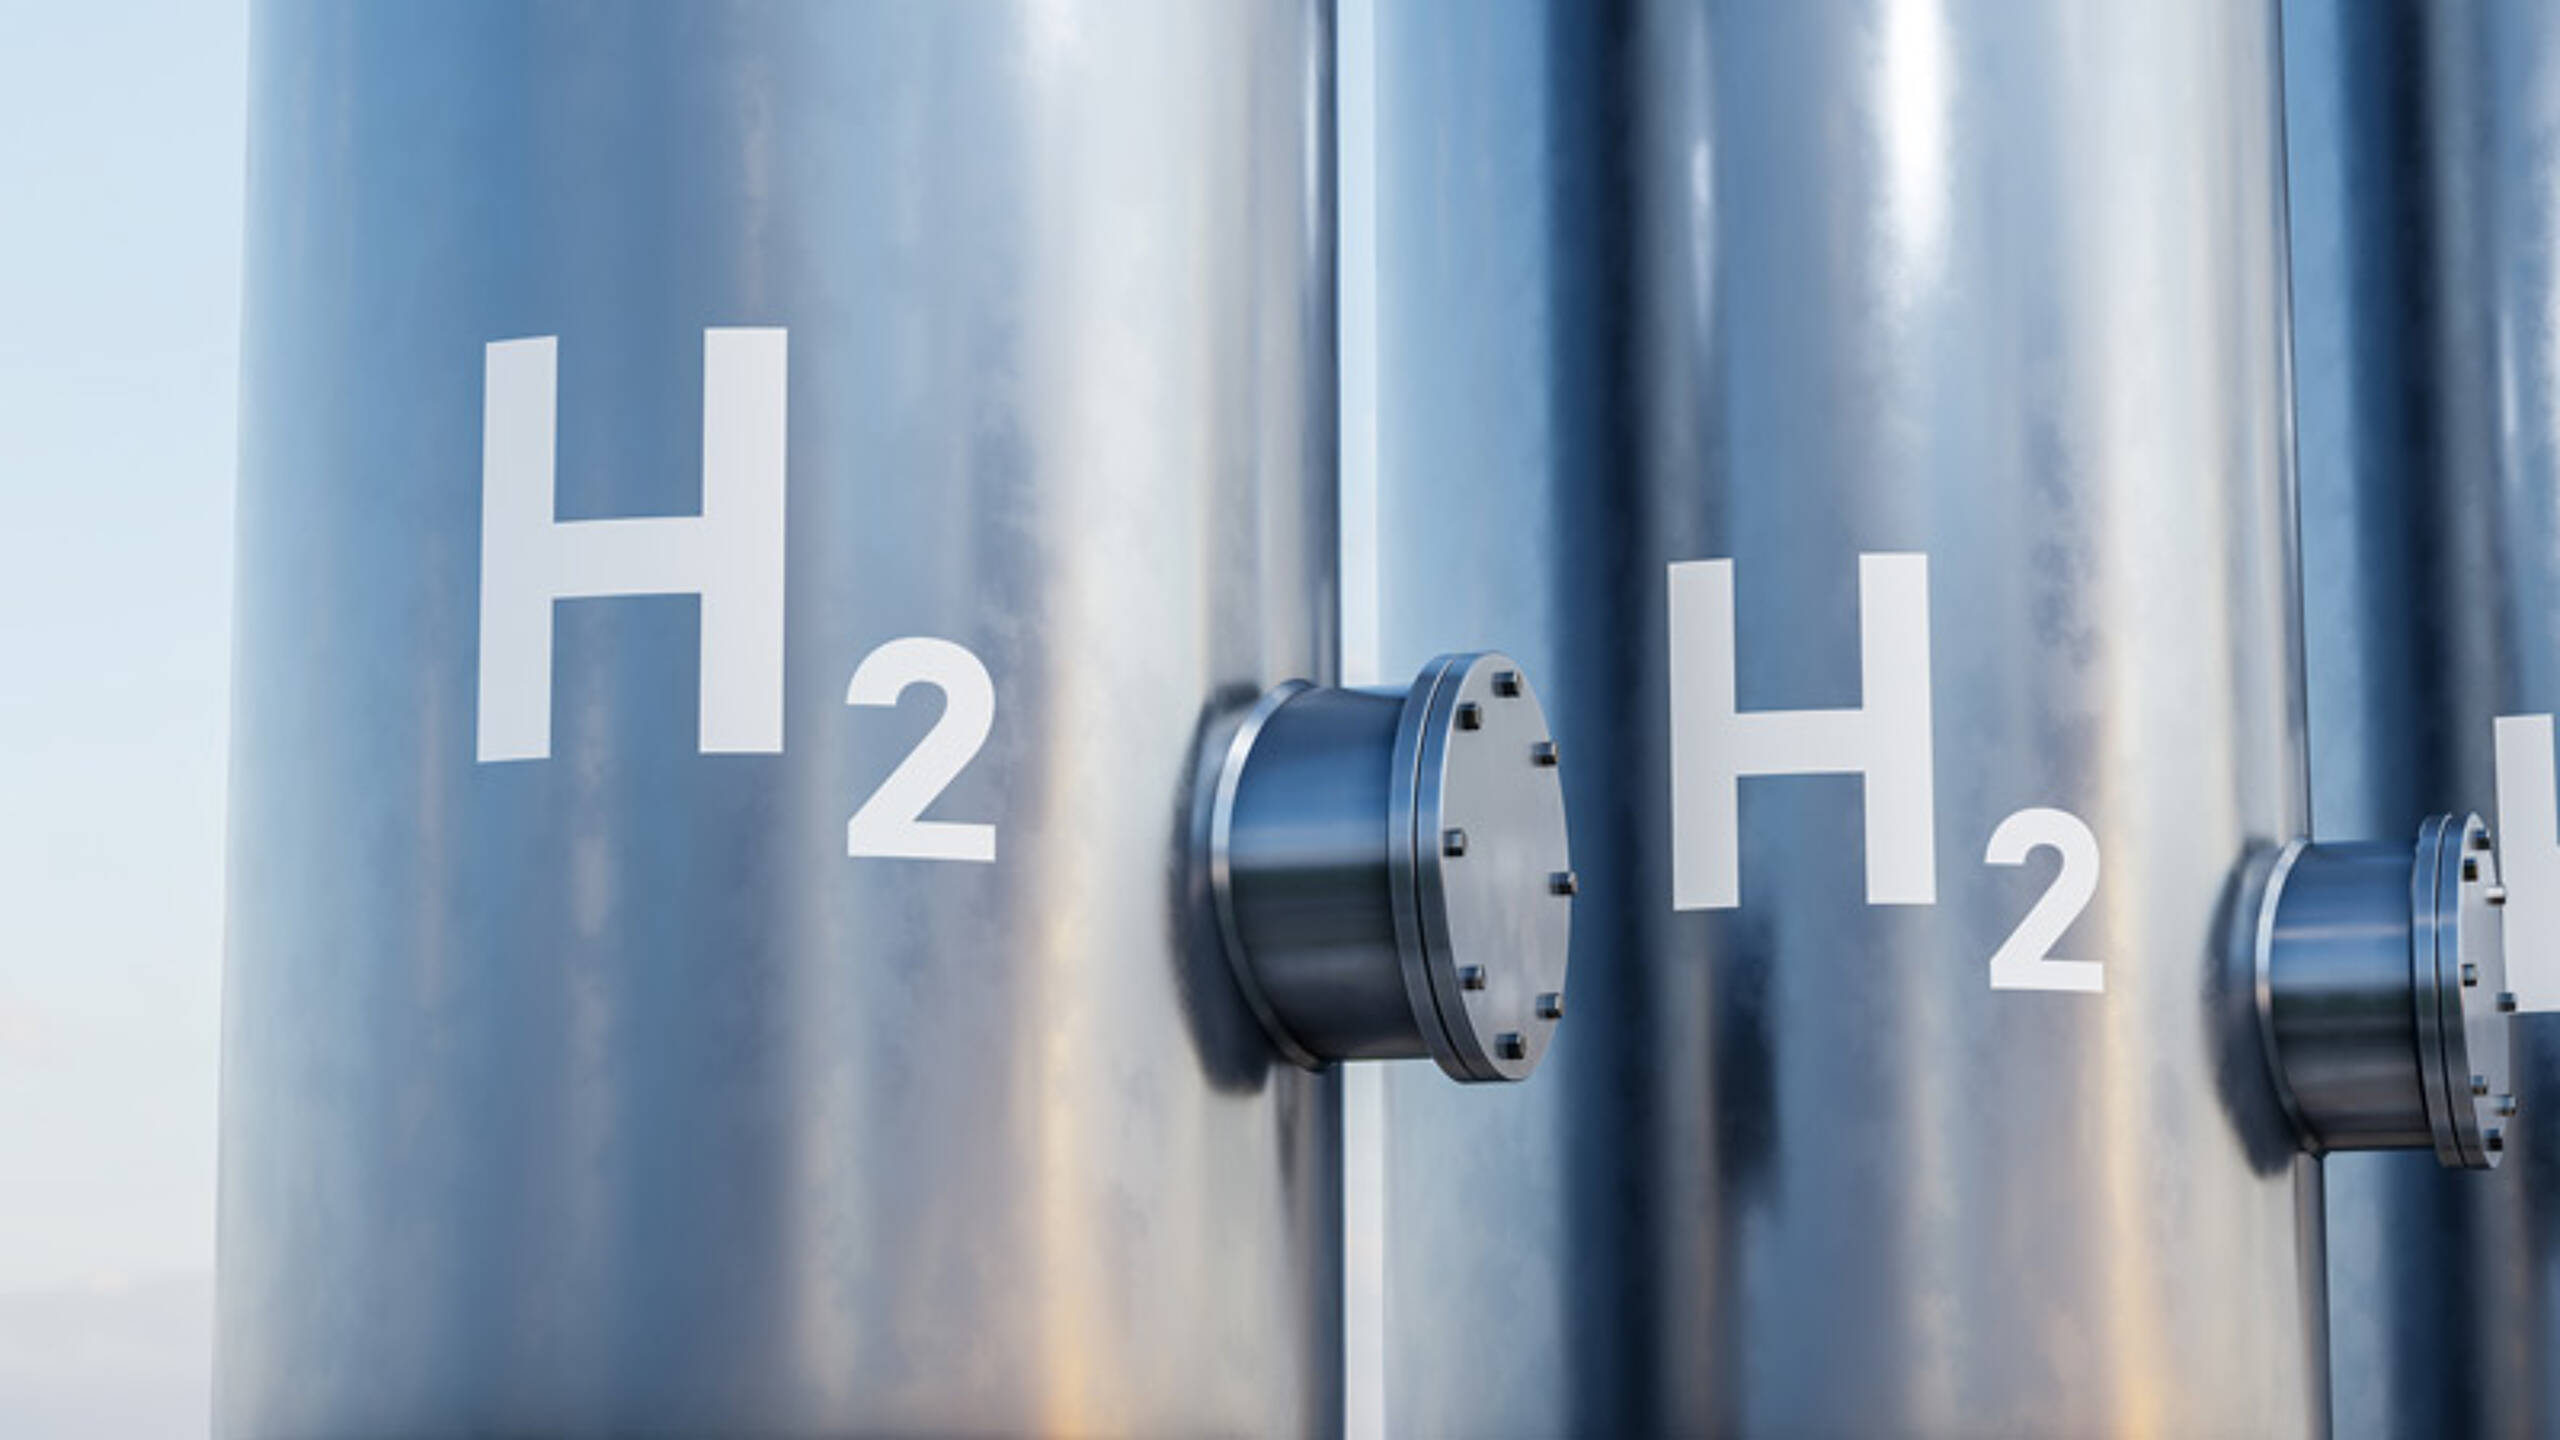 Report: UK risks losing hydrogen innovation race, with EU and Japan pulling ahead